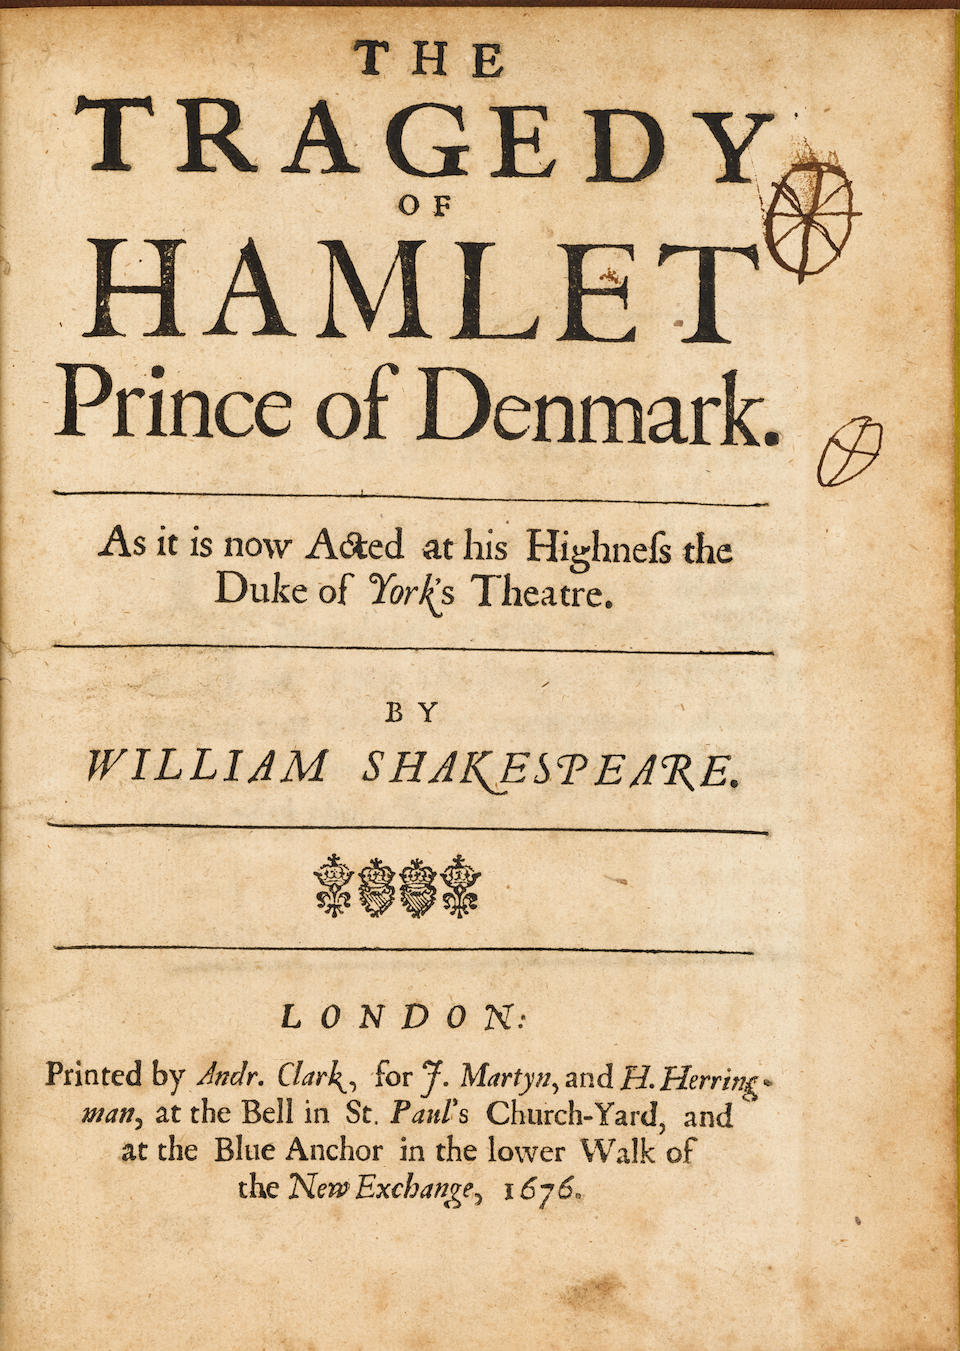 SHAKESPEARE, WILLIAM. 1546-1616. The Tragedy of&#8239;Hamlet, Prince of Denmark. As it is now Acted at his Highness the Duke of York's Theatre. Adapted by Sir William Davenant (1606-1668). London: Printed by Andrew Clark for J. Martyn and H. Herringman,&#8239;1676.